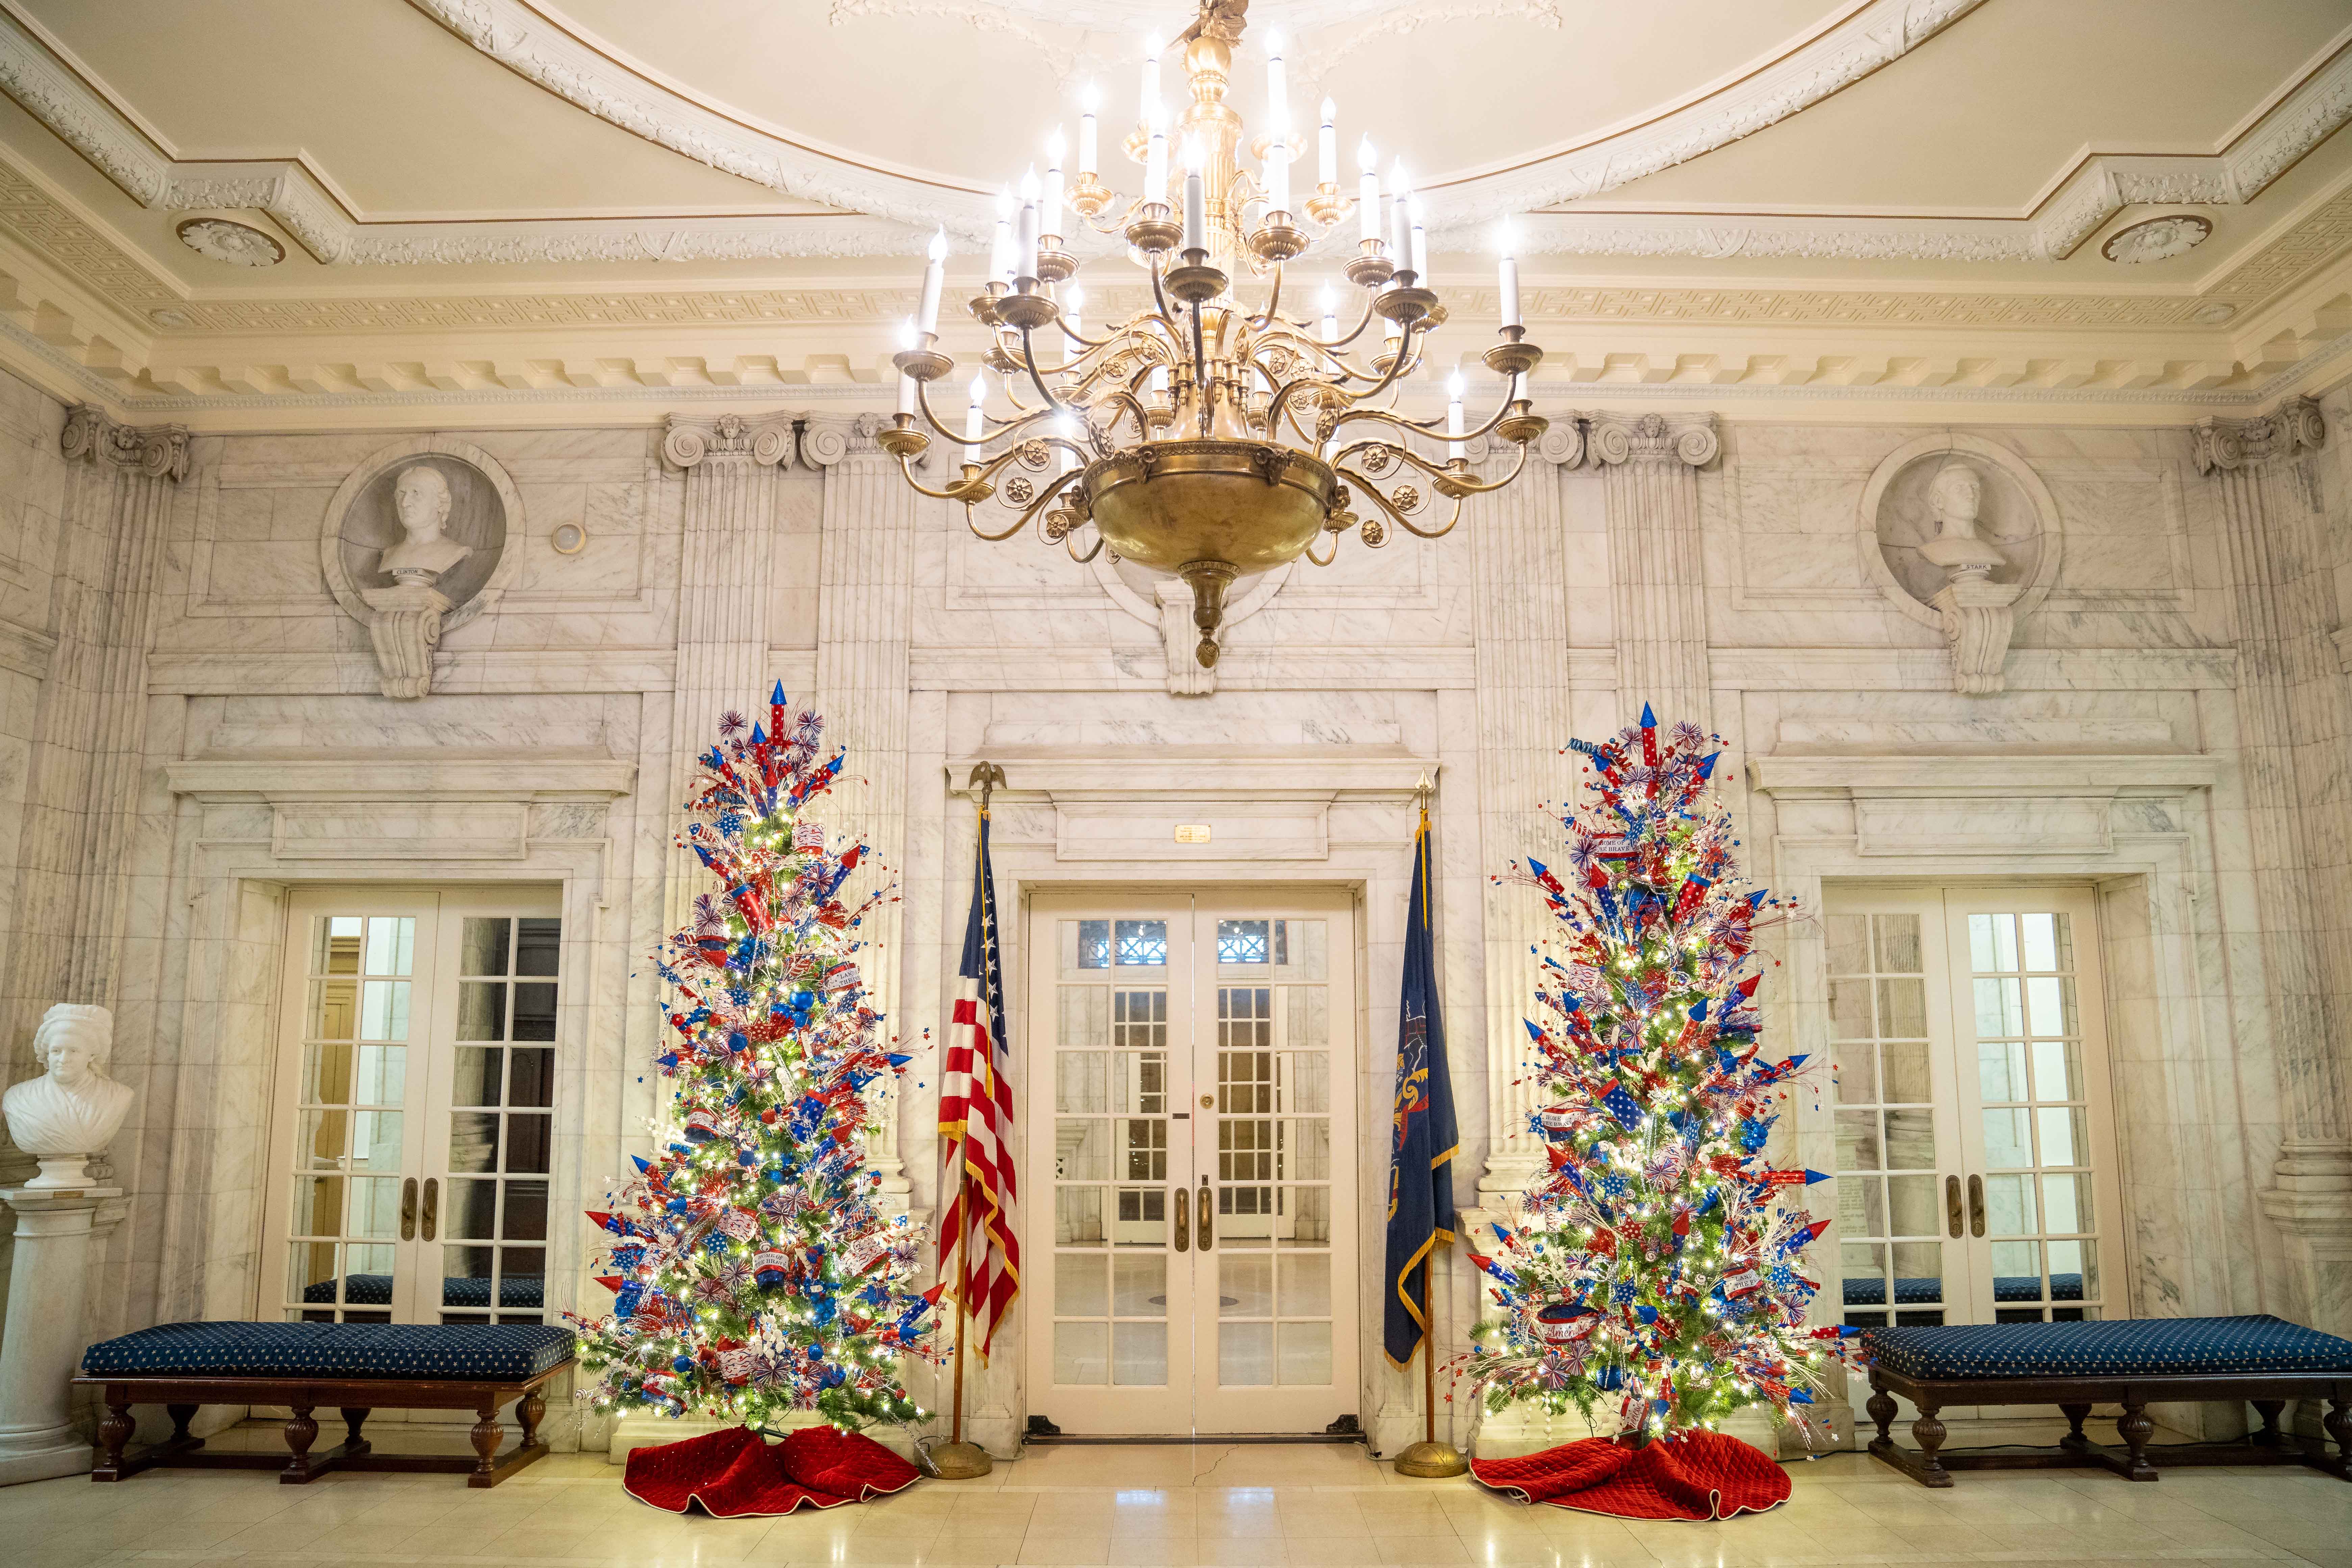 DAR entrance halls with two Christmas trees decked out in red, white, and blue